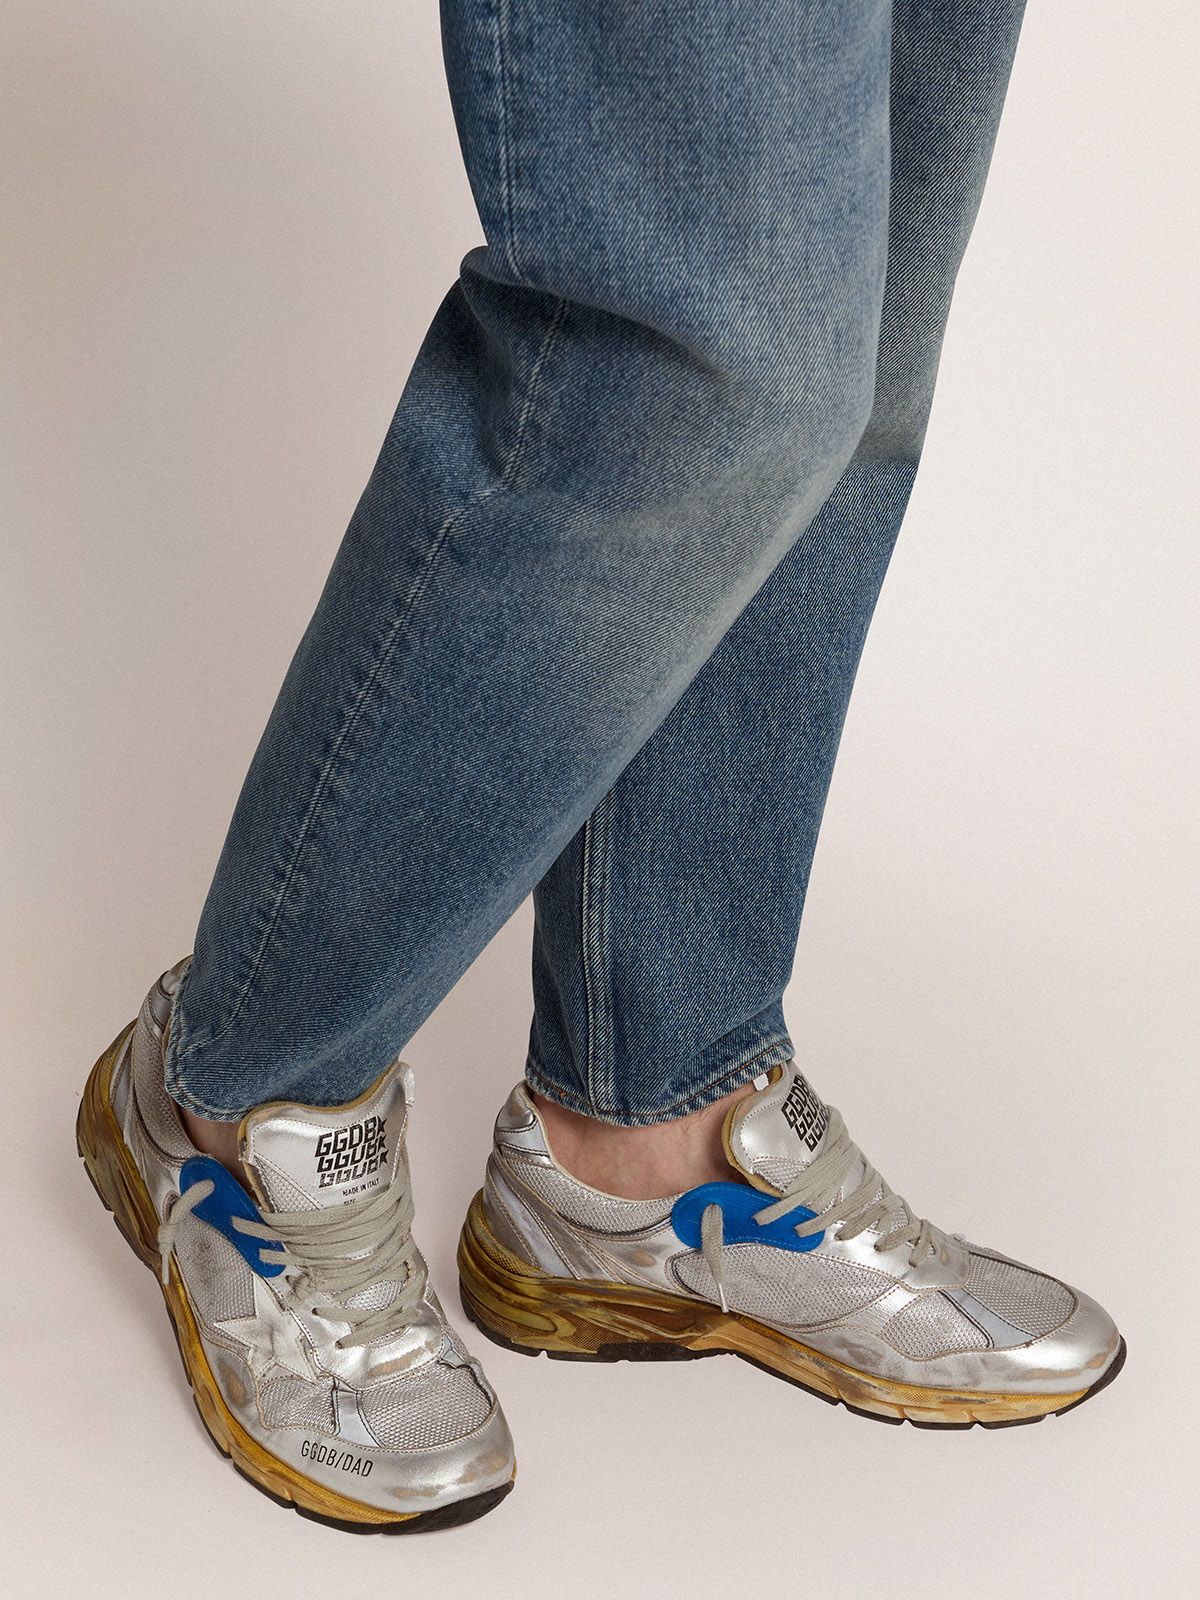 Silver Dad-Star sneakers with distressed finish | Goose